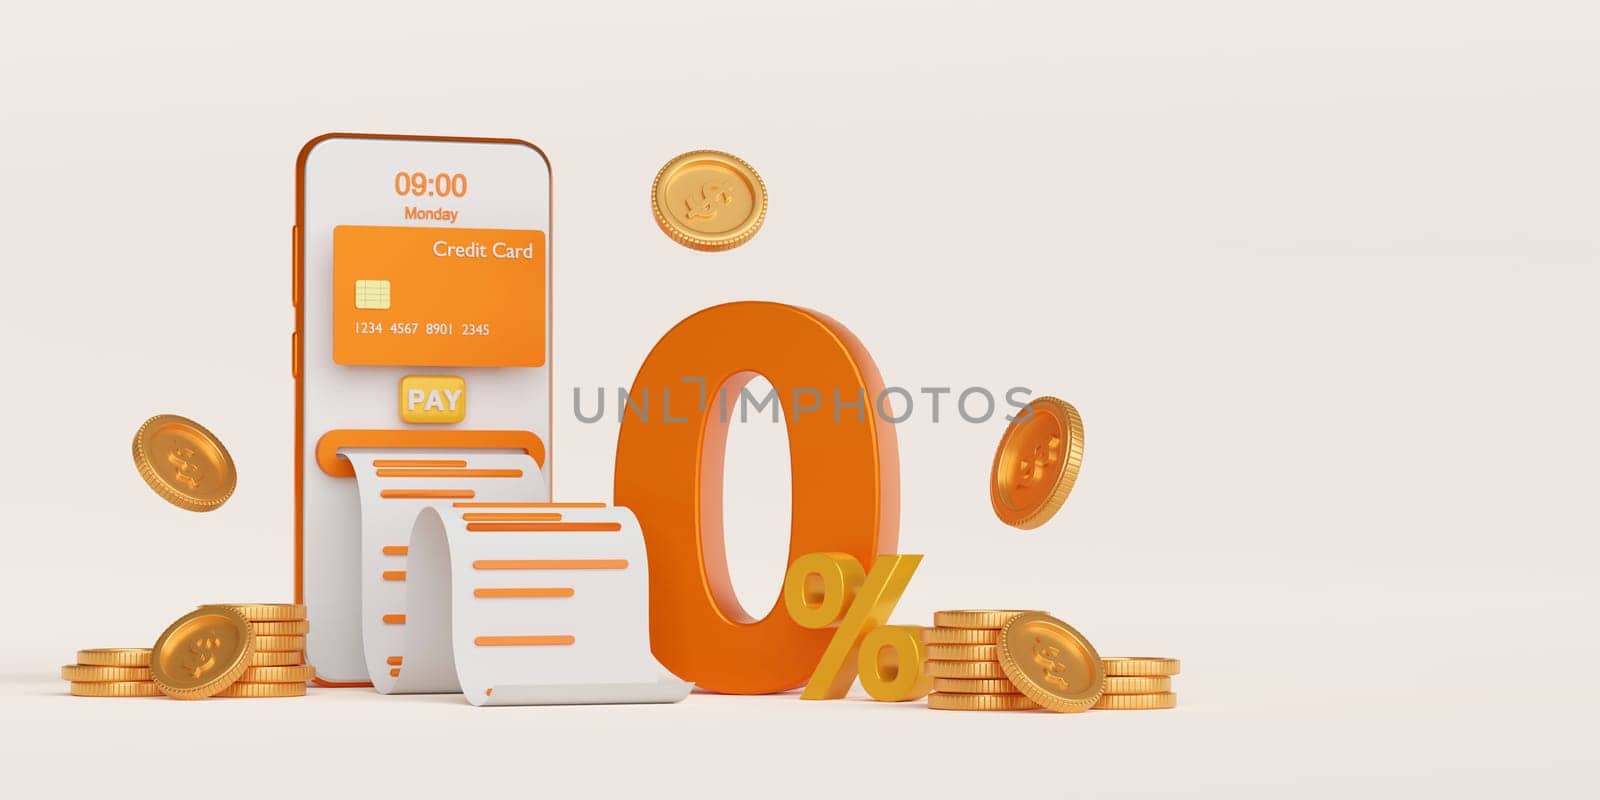 Shopping online using credit card with 0% interest installment payments on smartphone, 3d illustration